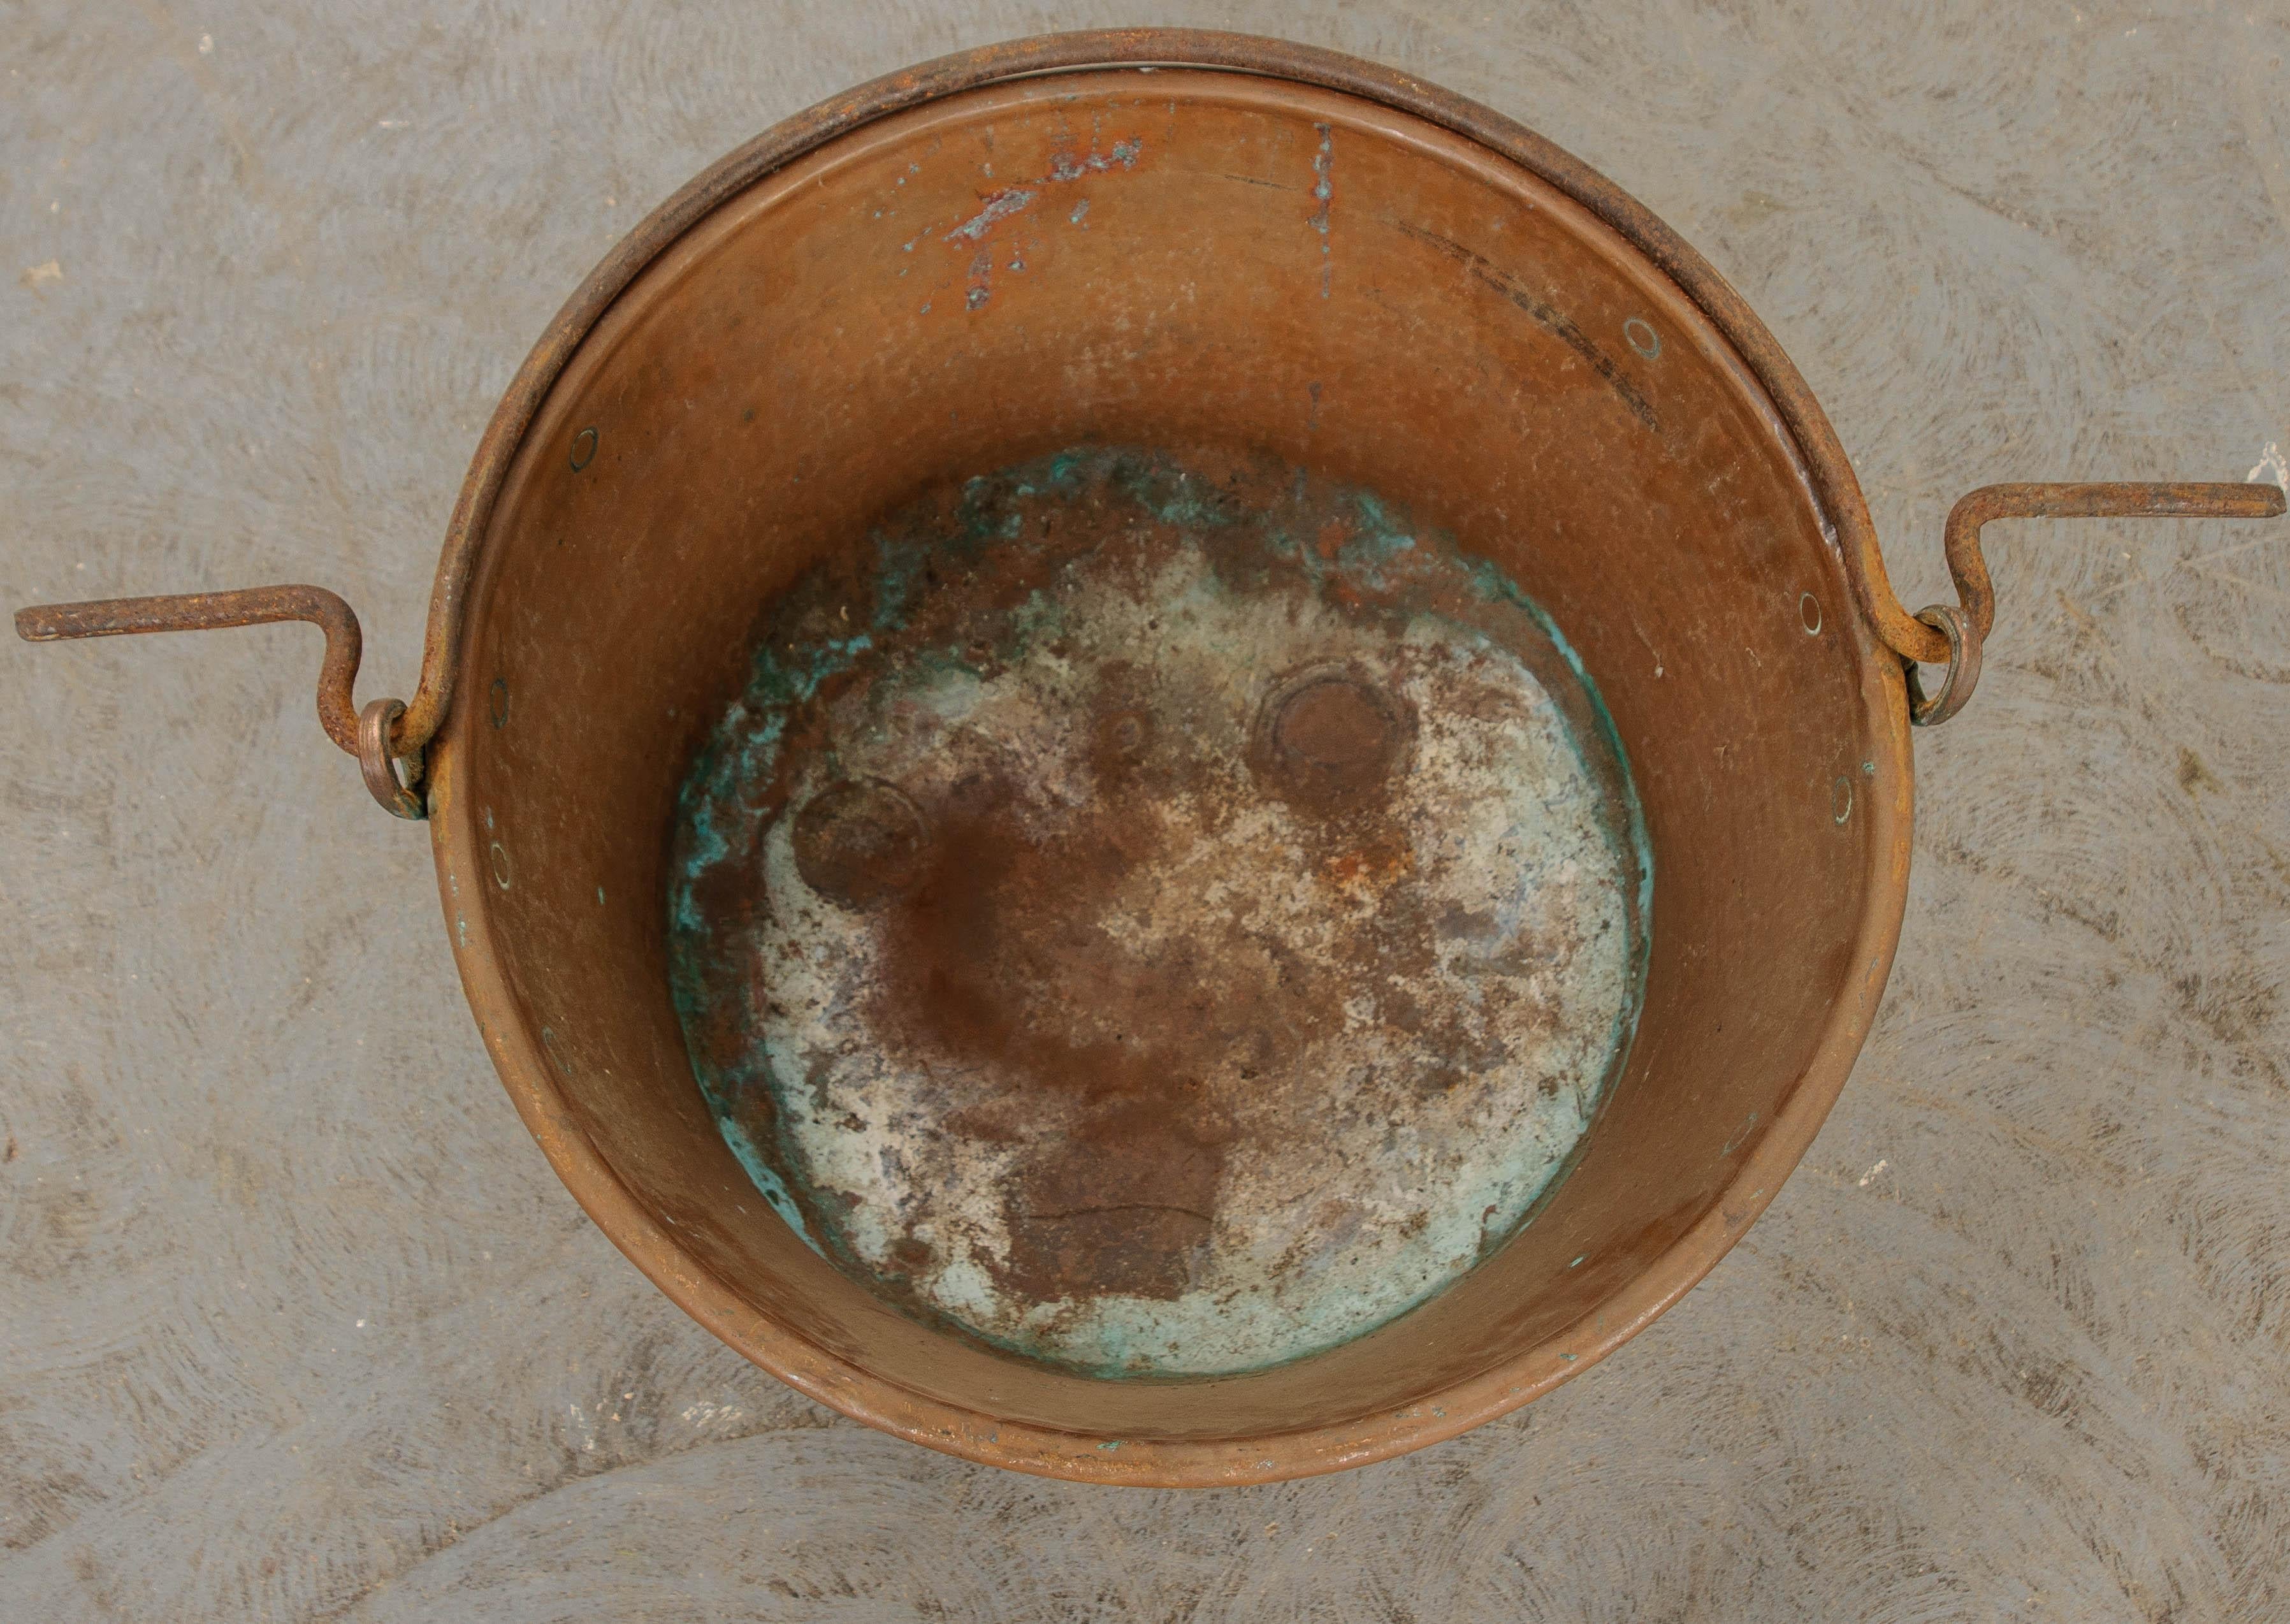 A sizeable antique copper pot, equipped with a forged iron handle that can be used to suspend the vessel over a fire. The pot has a hammered exterior that gives the antique a styled finish. The copper has patinated wonderfully, with some verdigris